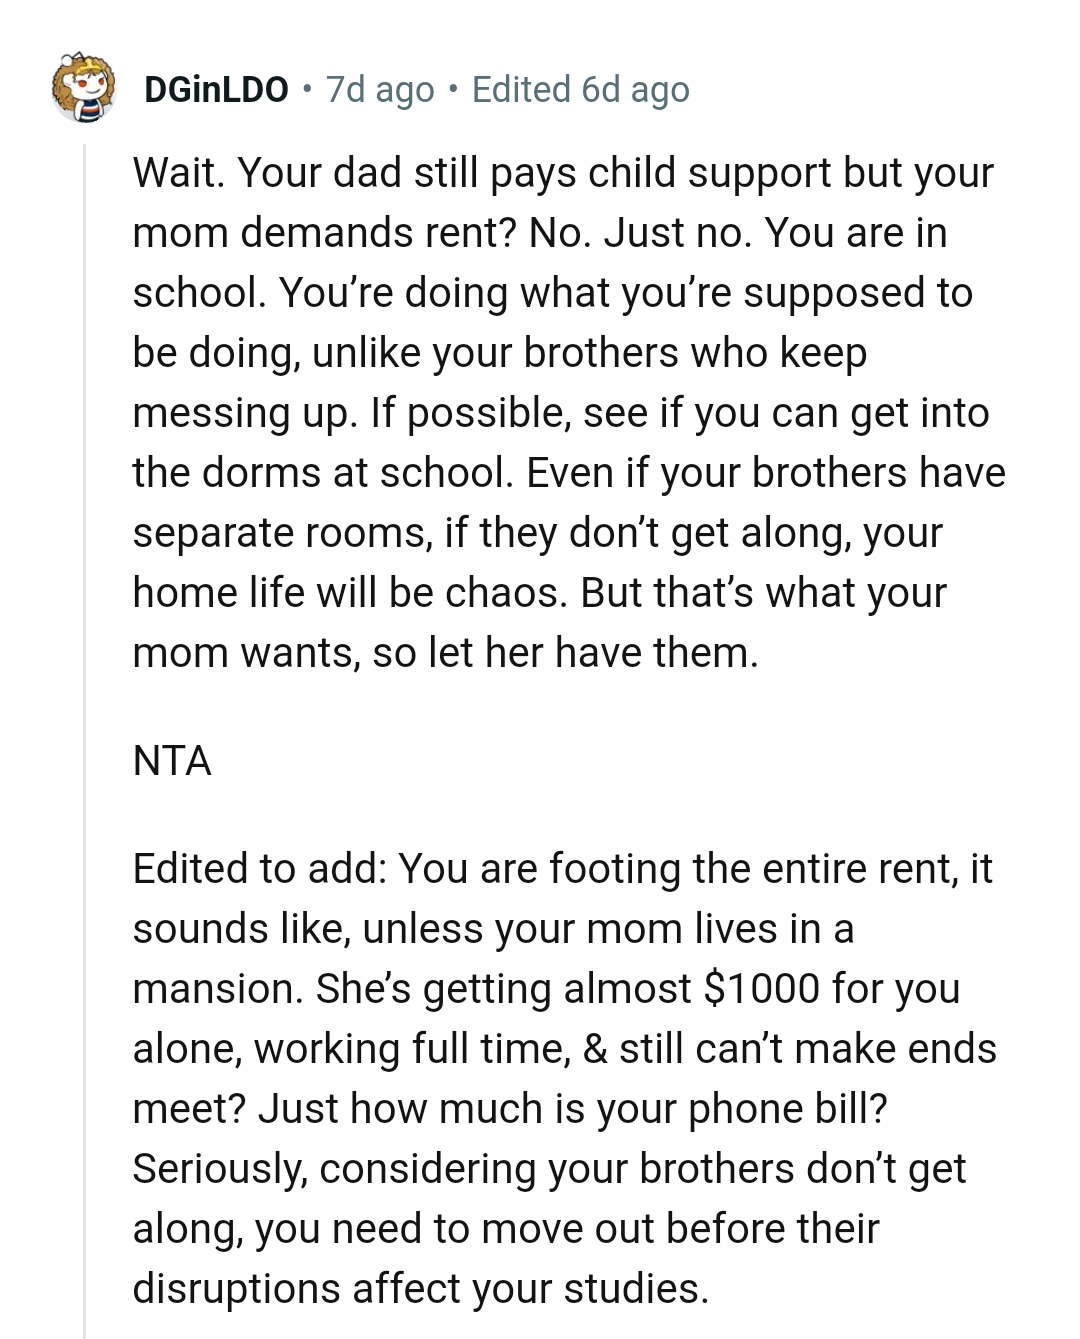 OP's dad pays child support